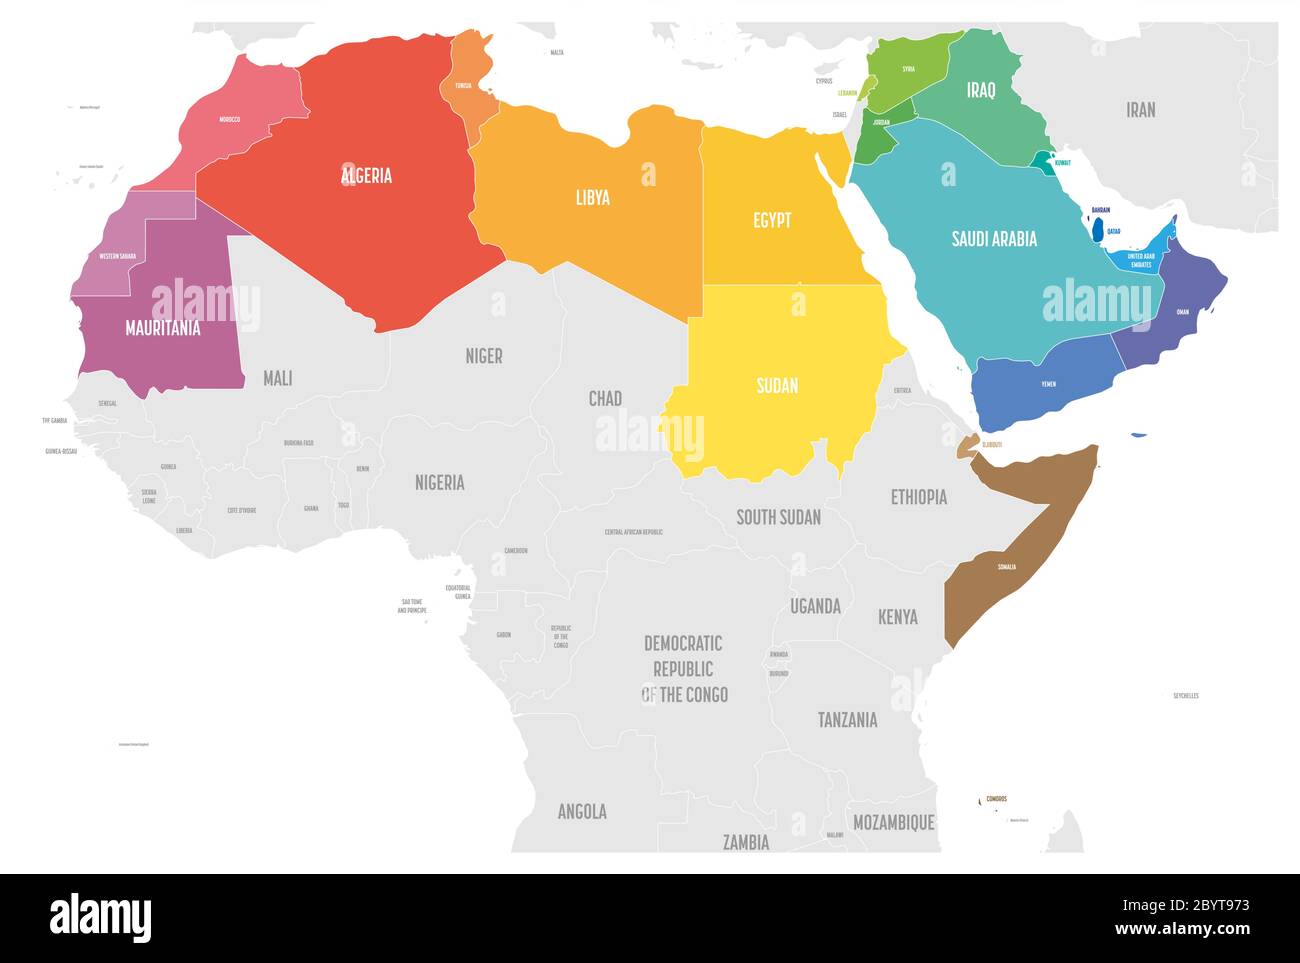 Arab World states political map with colorfully higlighted 22 arabic-speaking countries of the Arab League. Northern Africa and Middle East region. Vector illustration. Stock Vector